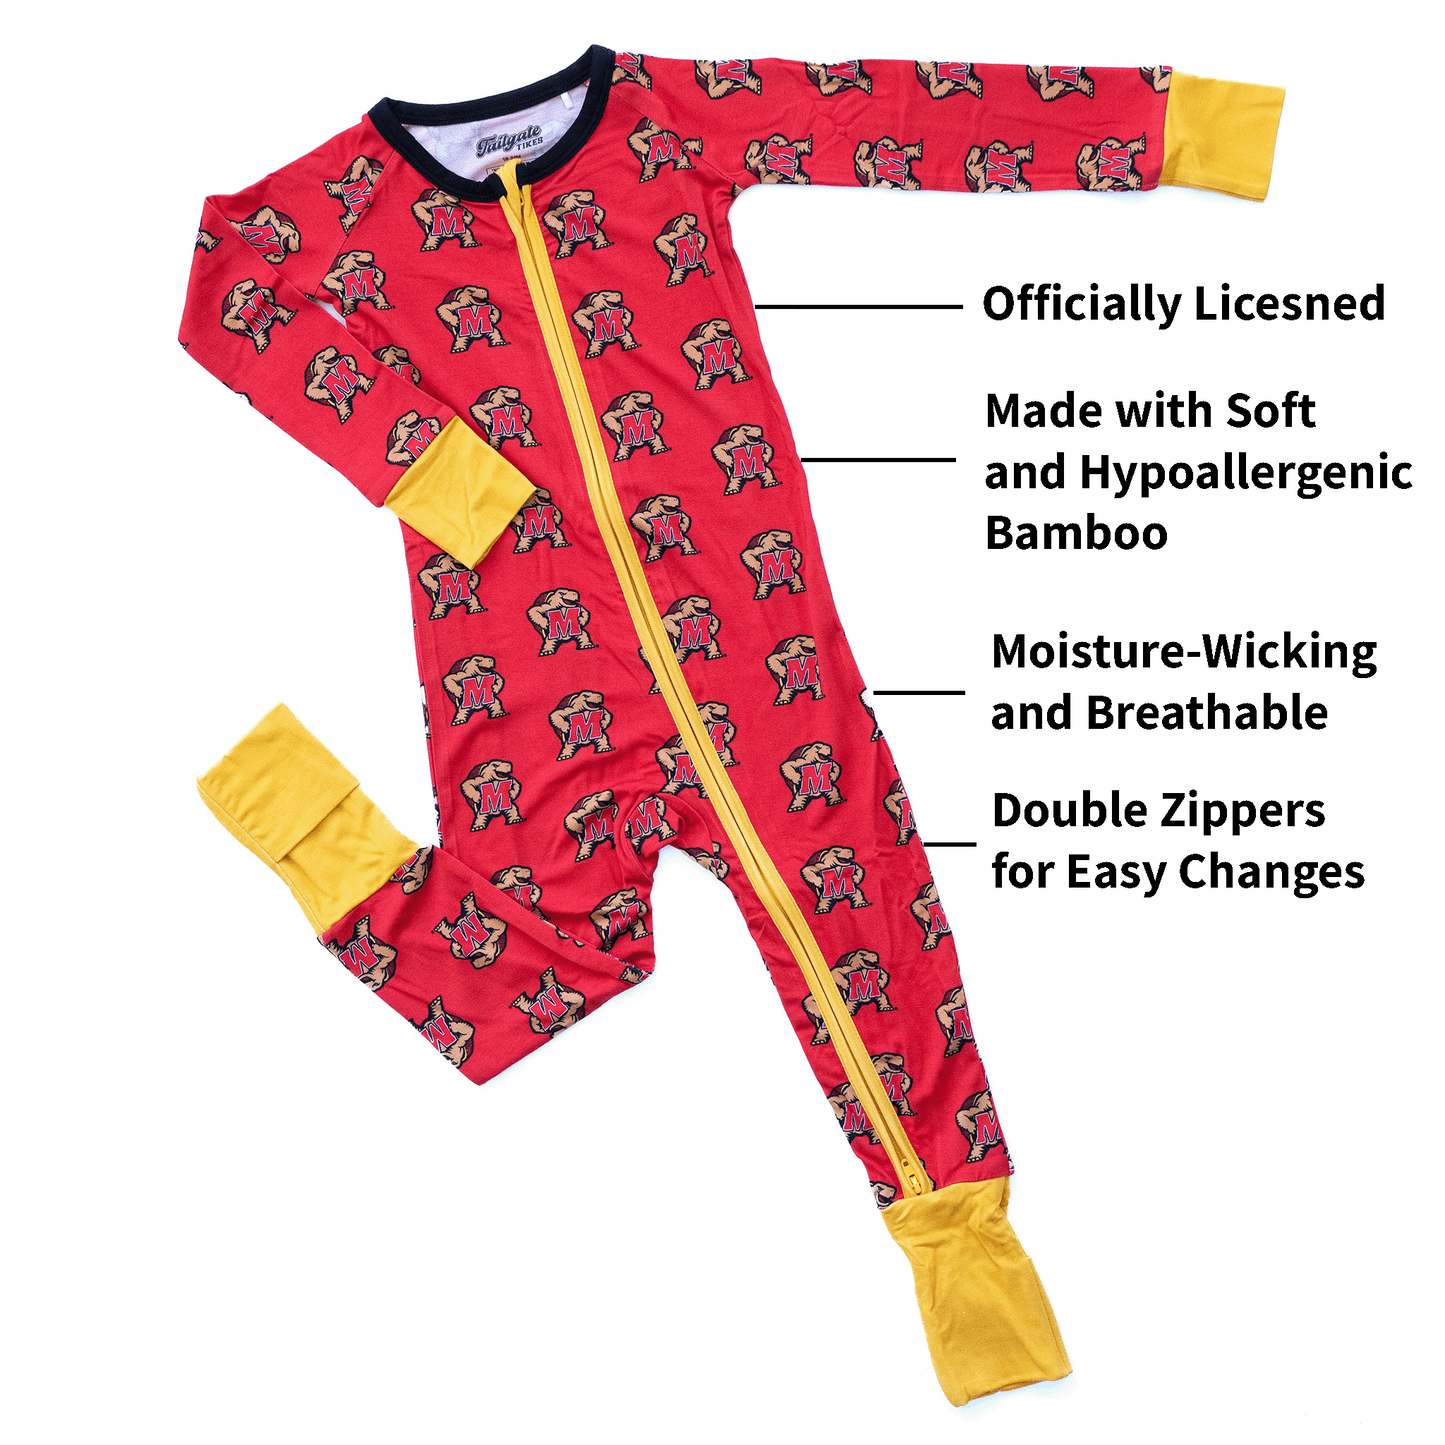 The Maryland Terrapins Onesie by Tailgate Tikes is a red baby onesie with an all-over small character design. It features yellow cuffs and a yellow interior zipper lining. Text on the right side highlights its features: "Officially Licensed Tailgate Tikes," "Made with Soft and Hypoallergenic Bamboo," "Moisture-Wicking and Breathable," and "Double Zippers for Easy Changes.